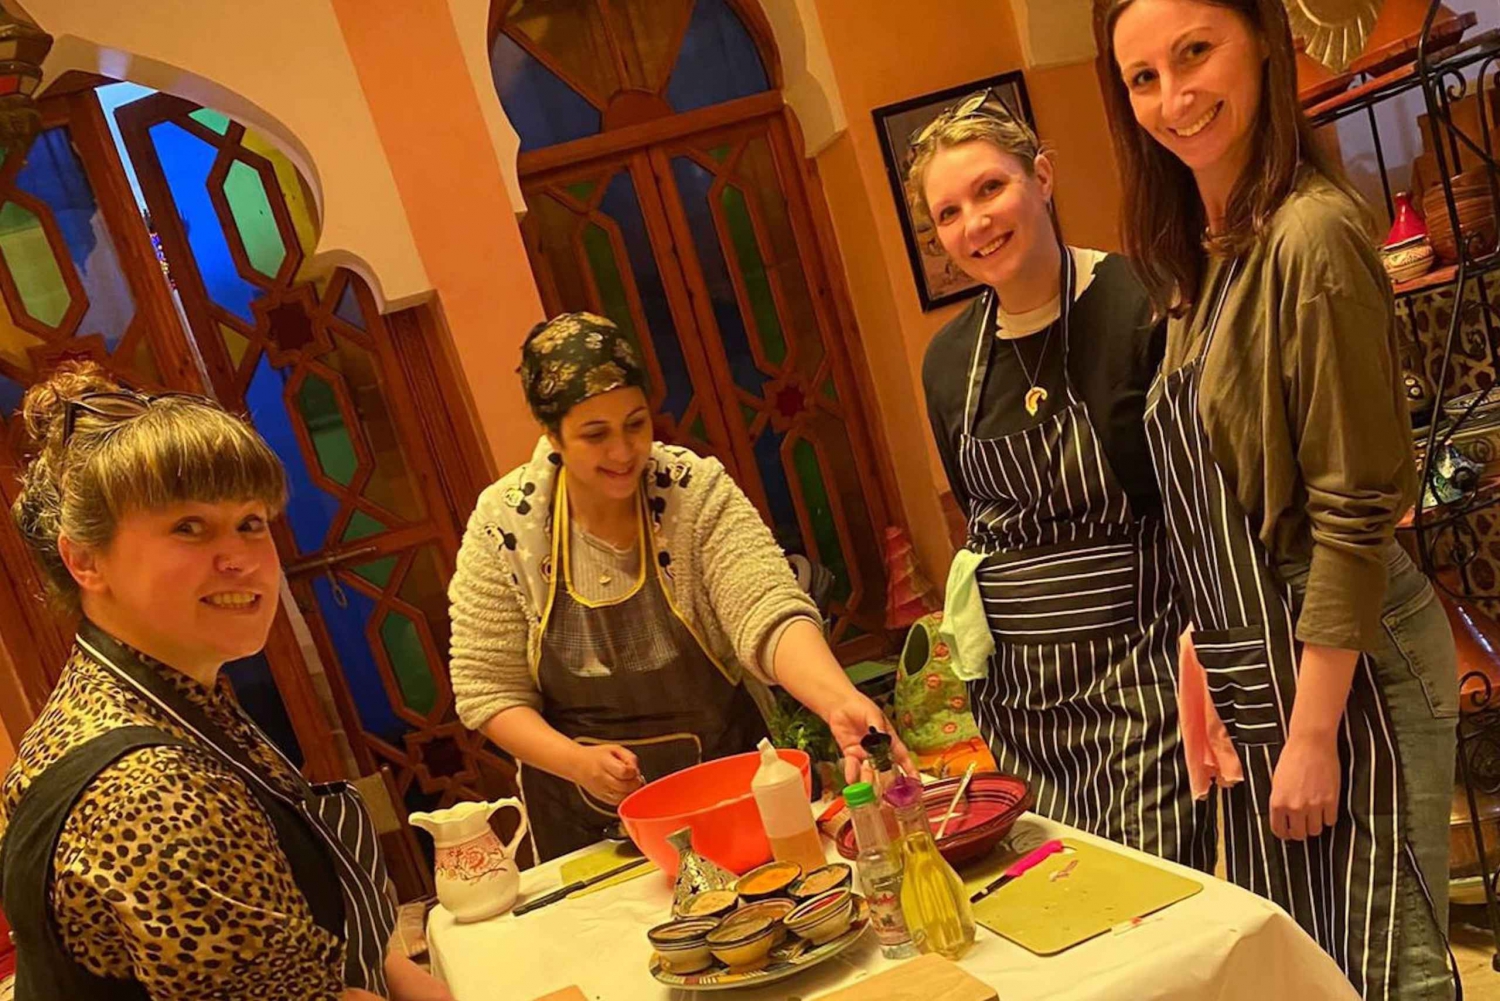 Marrakech: Moroccan Cooking Class with locals